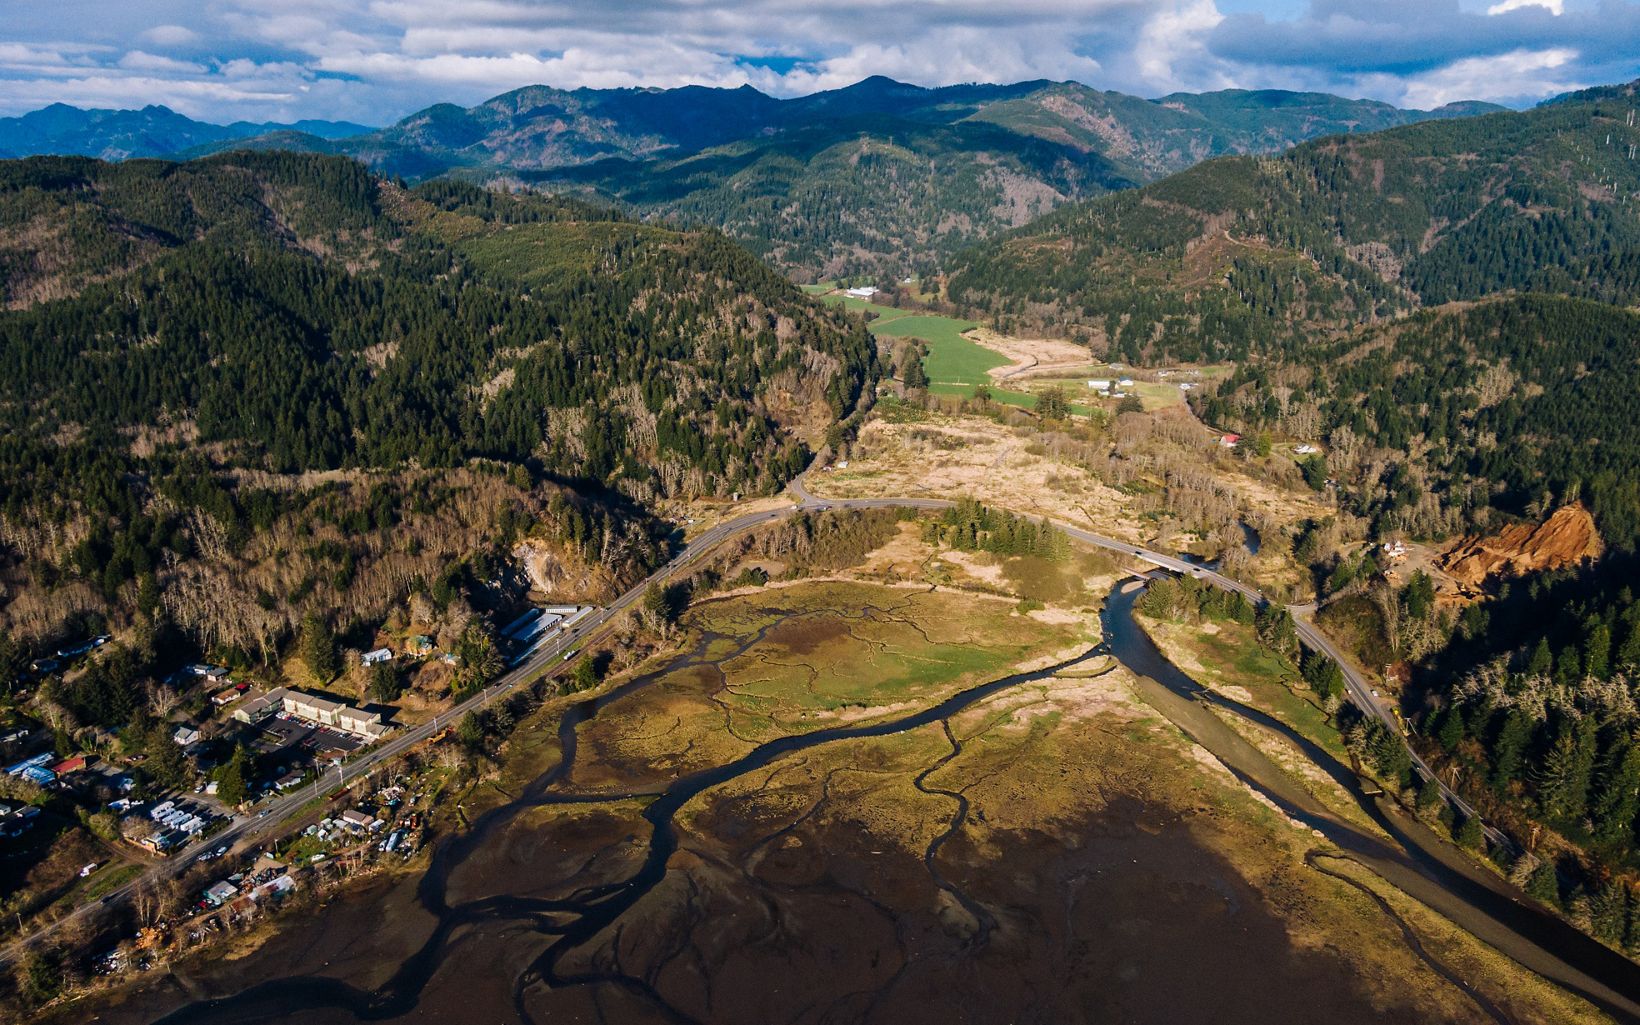 Aerial view of Miami Wetlands Preserve in Oregon on a sunny day with puffy clouds over mountains in the background.